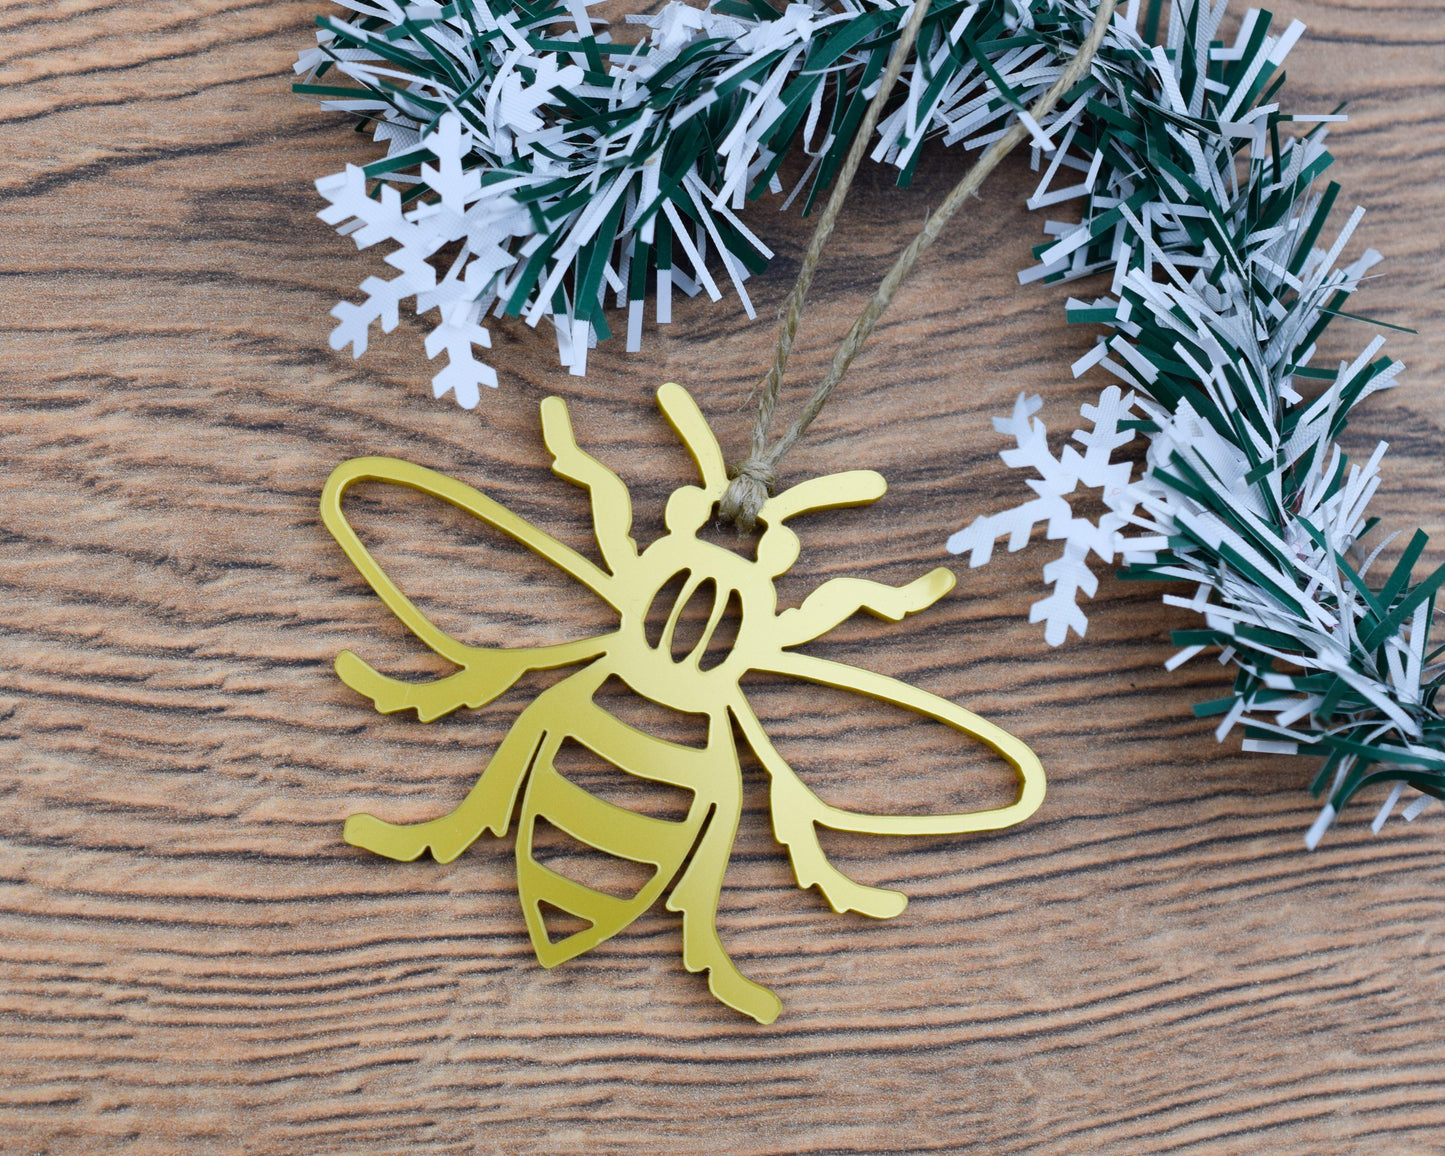 Acrylic Manchester Bee Christmas Ornament - The Manchester Shop